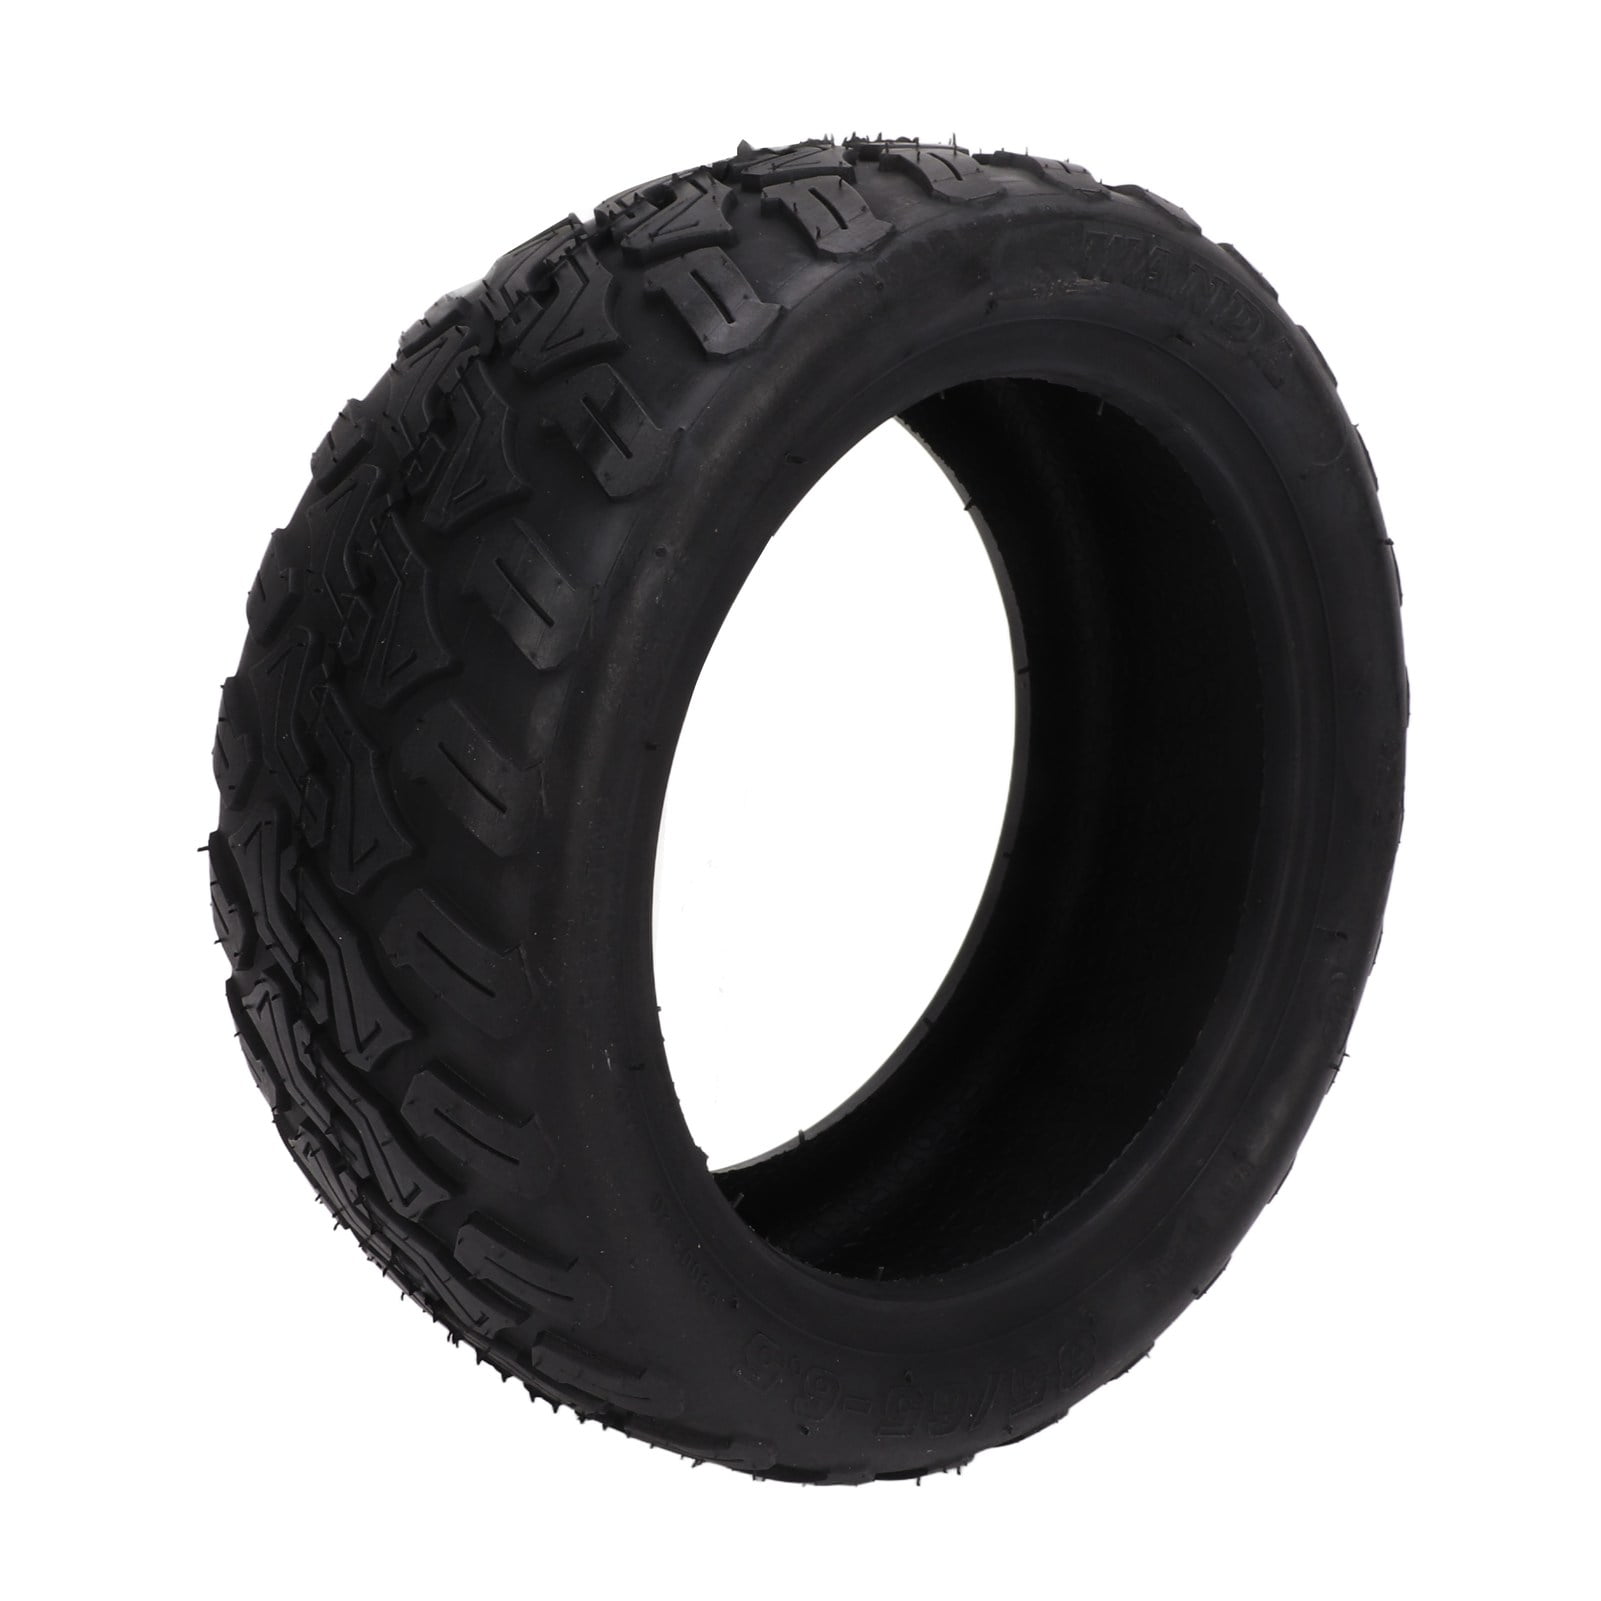 3.50-10 Tire | 3.50 10 Inch Tubeless Tire Compatible with 90/100-10 |  3.50-10 Offroad Snow Knobby Tire for Front/Rear Replacement Spare Accessory  Fits